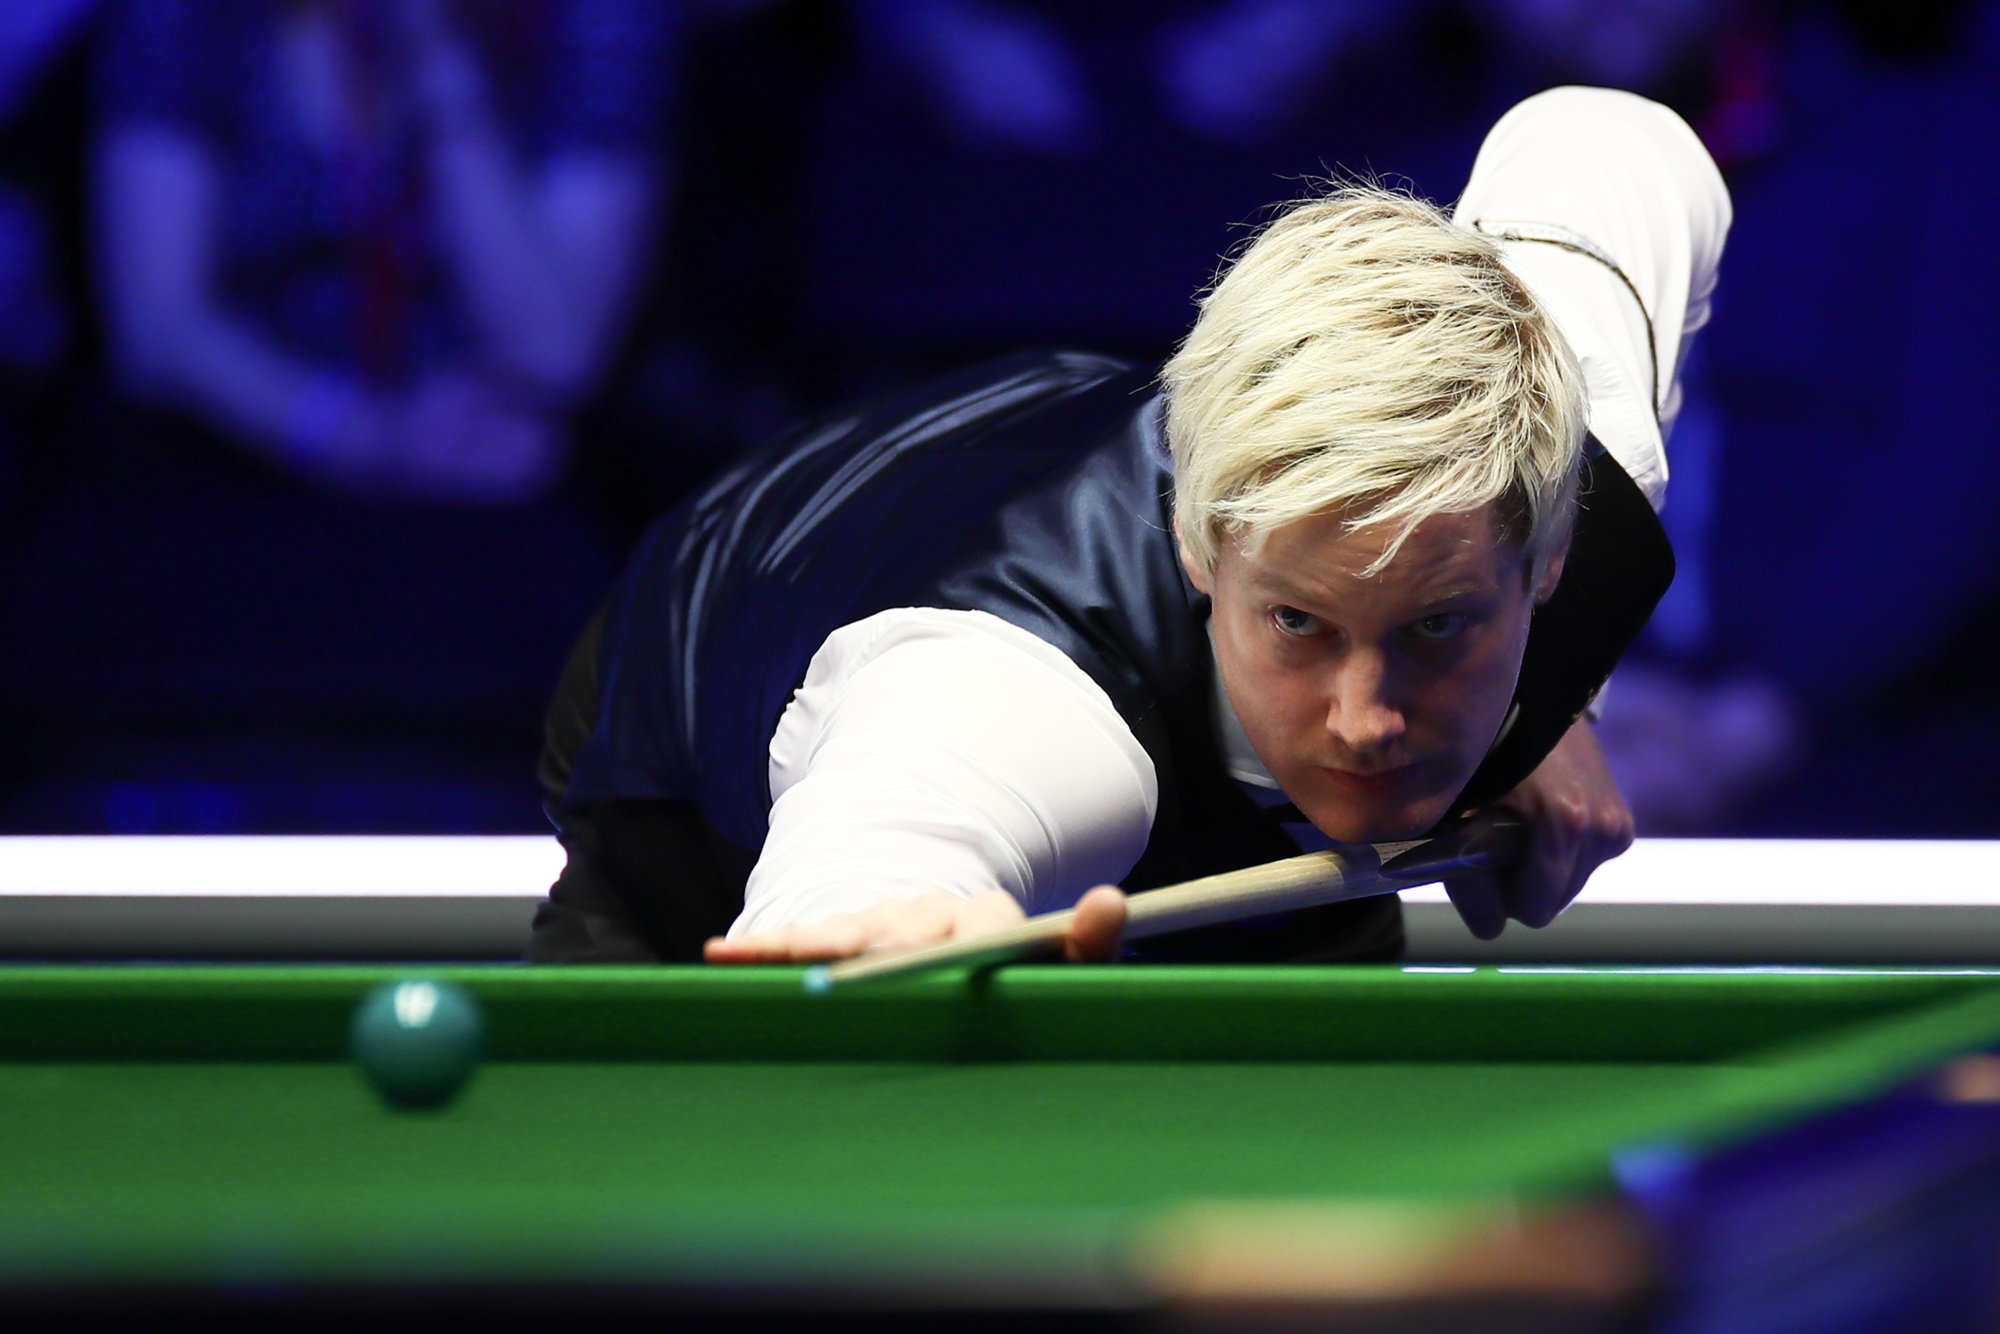 Neil Robertson Recovers From Health Scare To Reach World Grand Prix Final Snooker CBS Arena